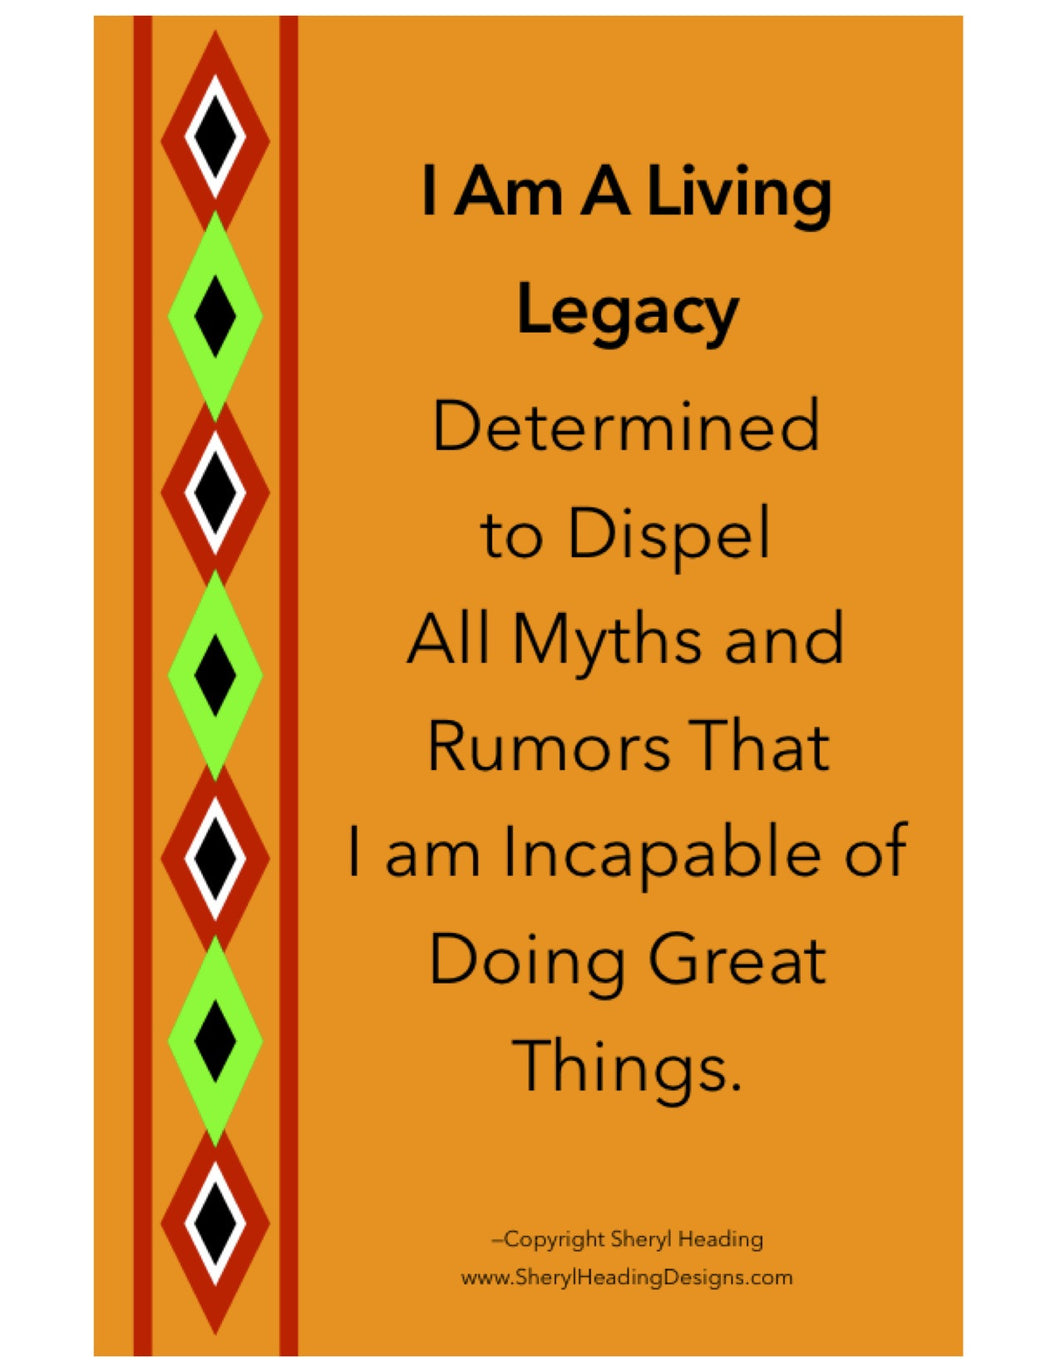 I Am A Loving Legacy Determined to Dispel All Myths and Rumors... Poster - Sheryl Heading Designs